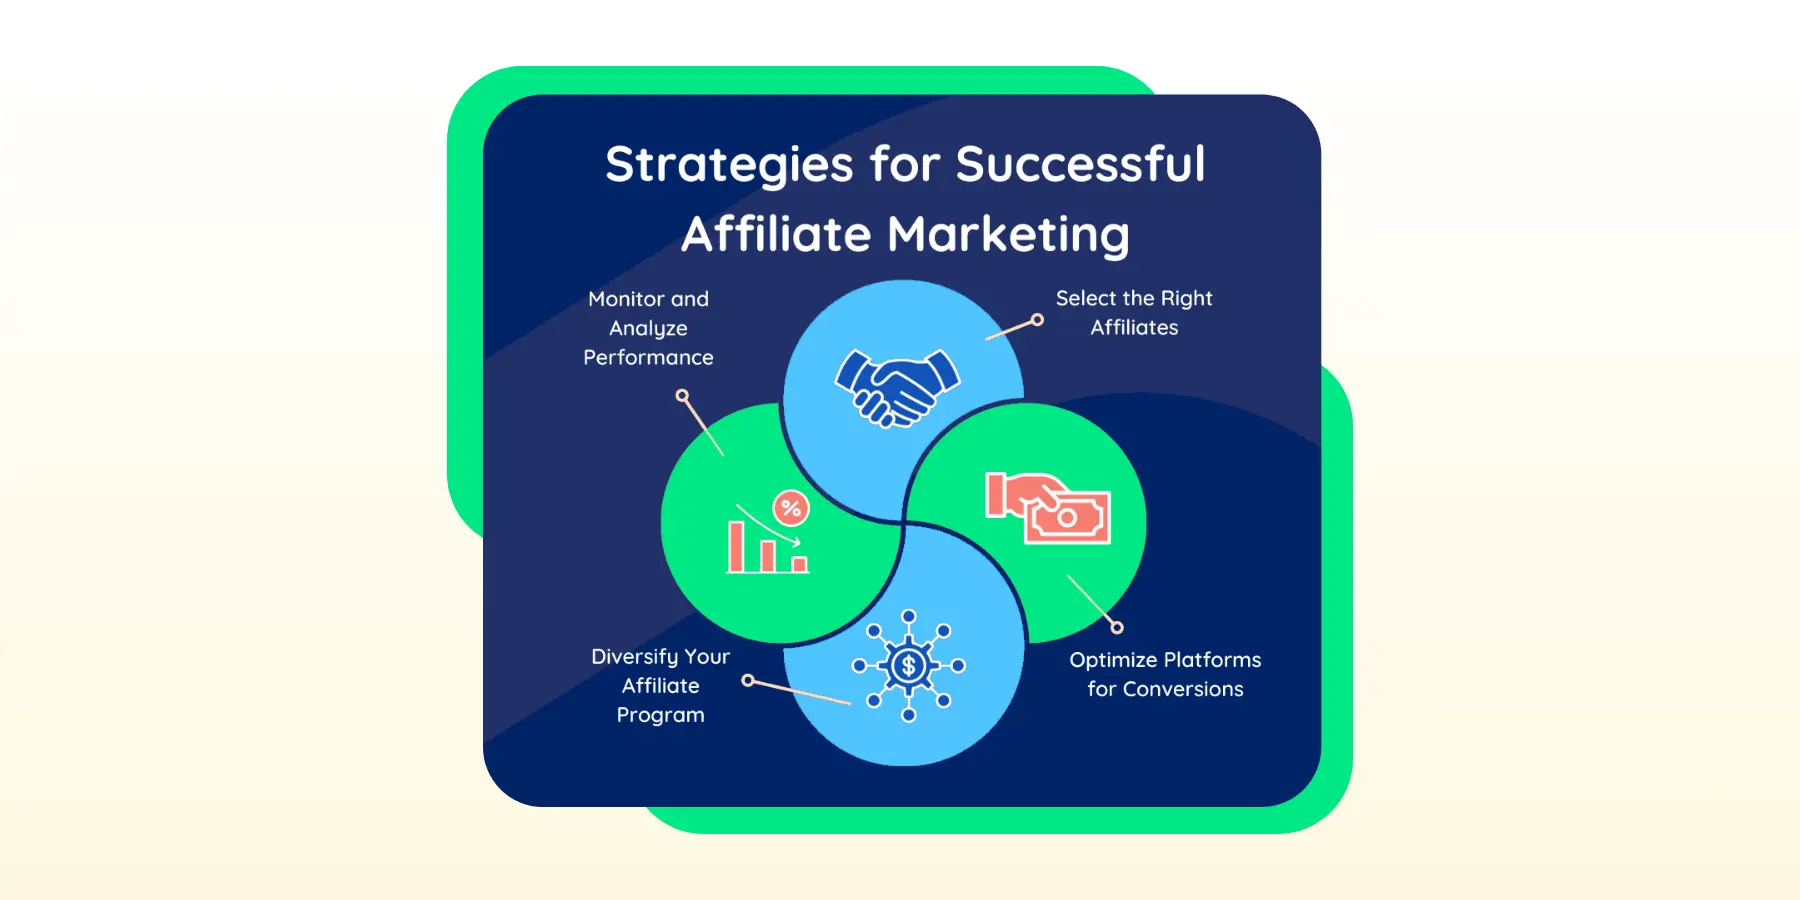 wati affiliate program, affiliate program, commission, extra income, products, signup, recommend, earn, 20% commission, Become an affiliate, Tapaffiliate, Partnerstack, Target, audience, Successful Strategies for Affiliate Marketing, Diversify, monitor, analyse, performance, optimise,  